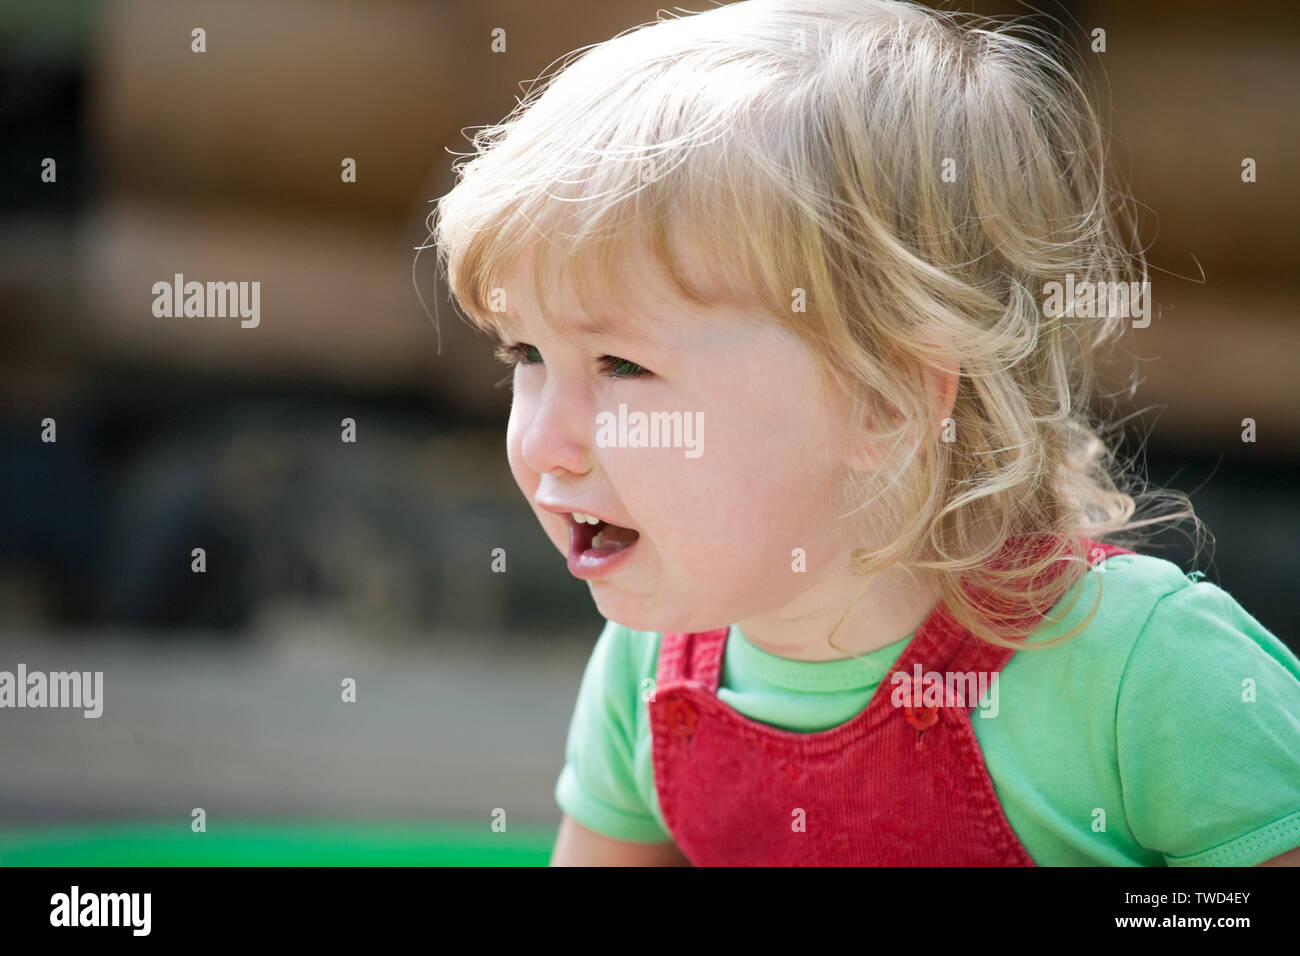 crying little blonde caucasian child face closeup view Stock Photo